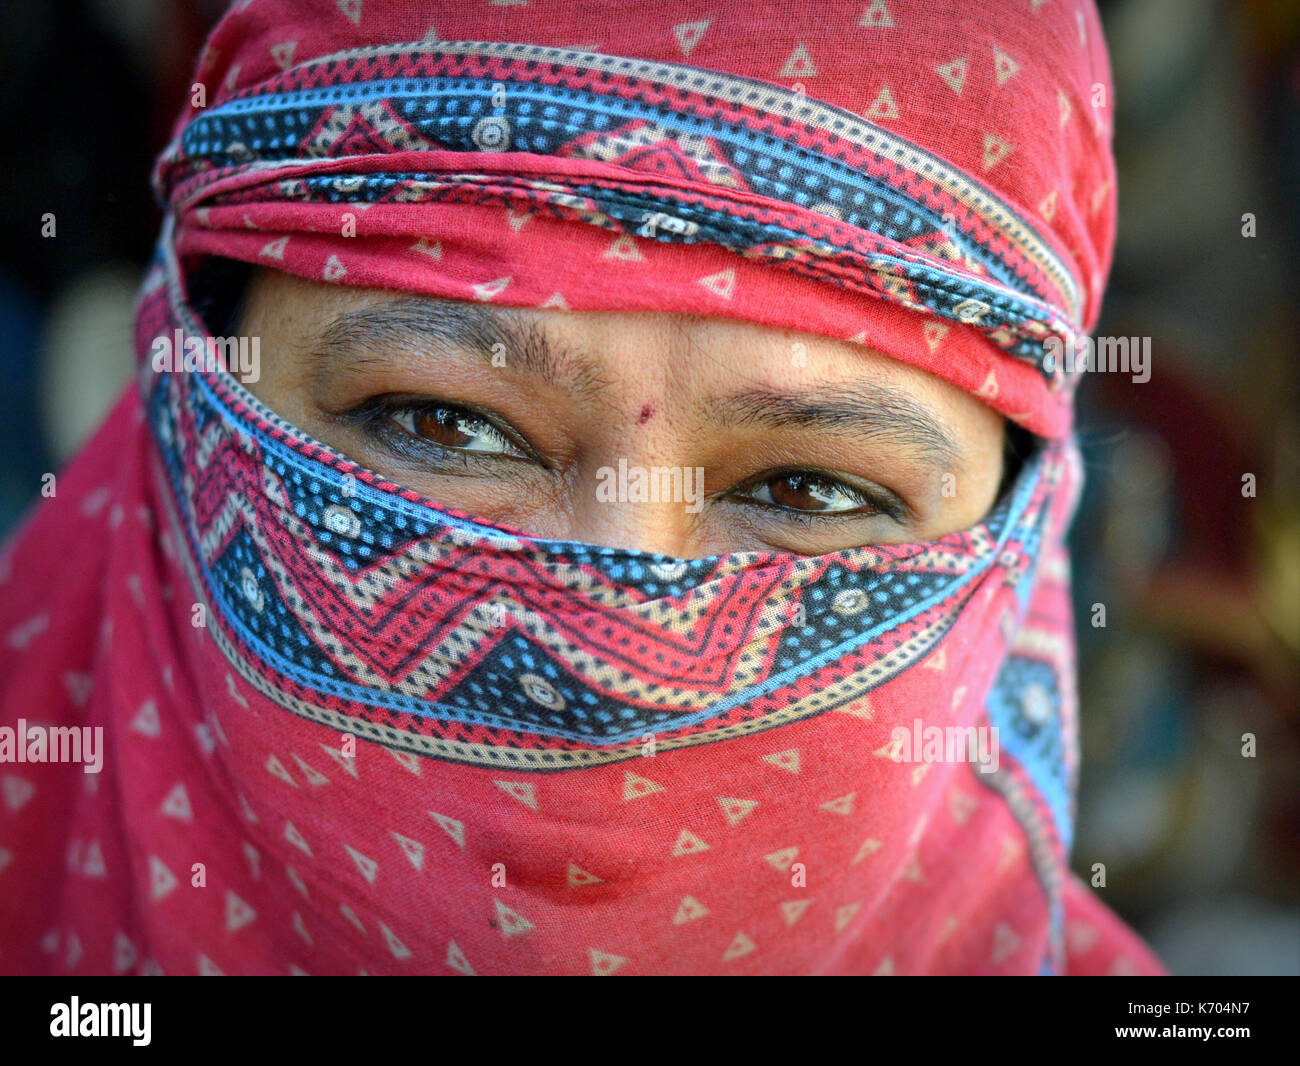 Indian Hindu woman with beautiful eyes covers her hair and face with a trendy secular head scarf and poses for the camera. Stock Photo